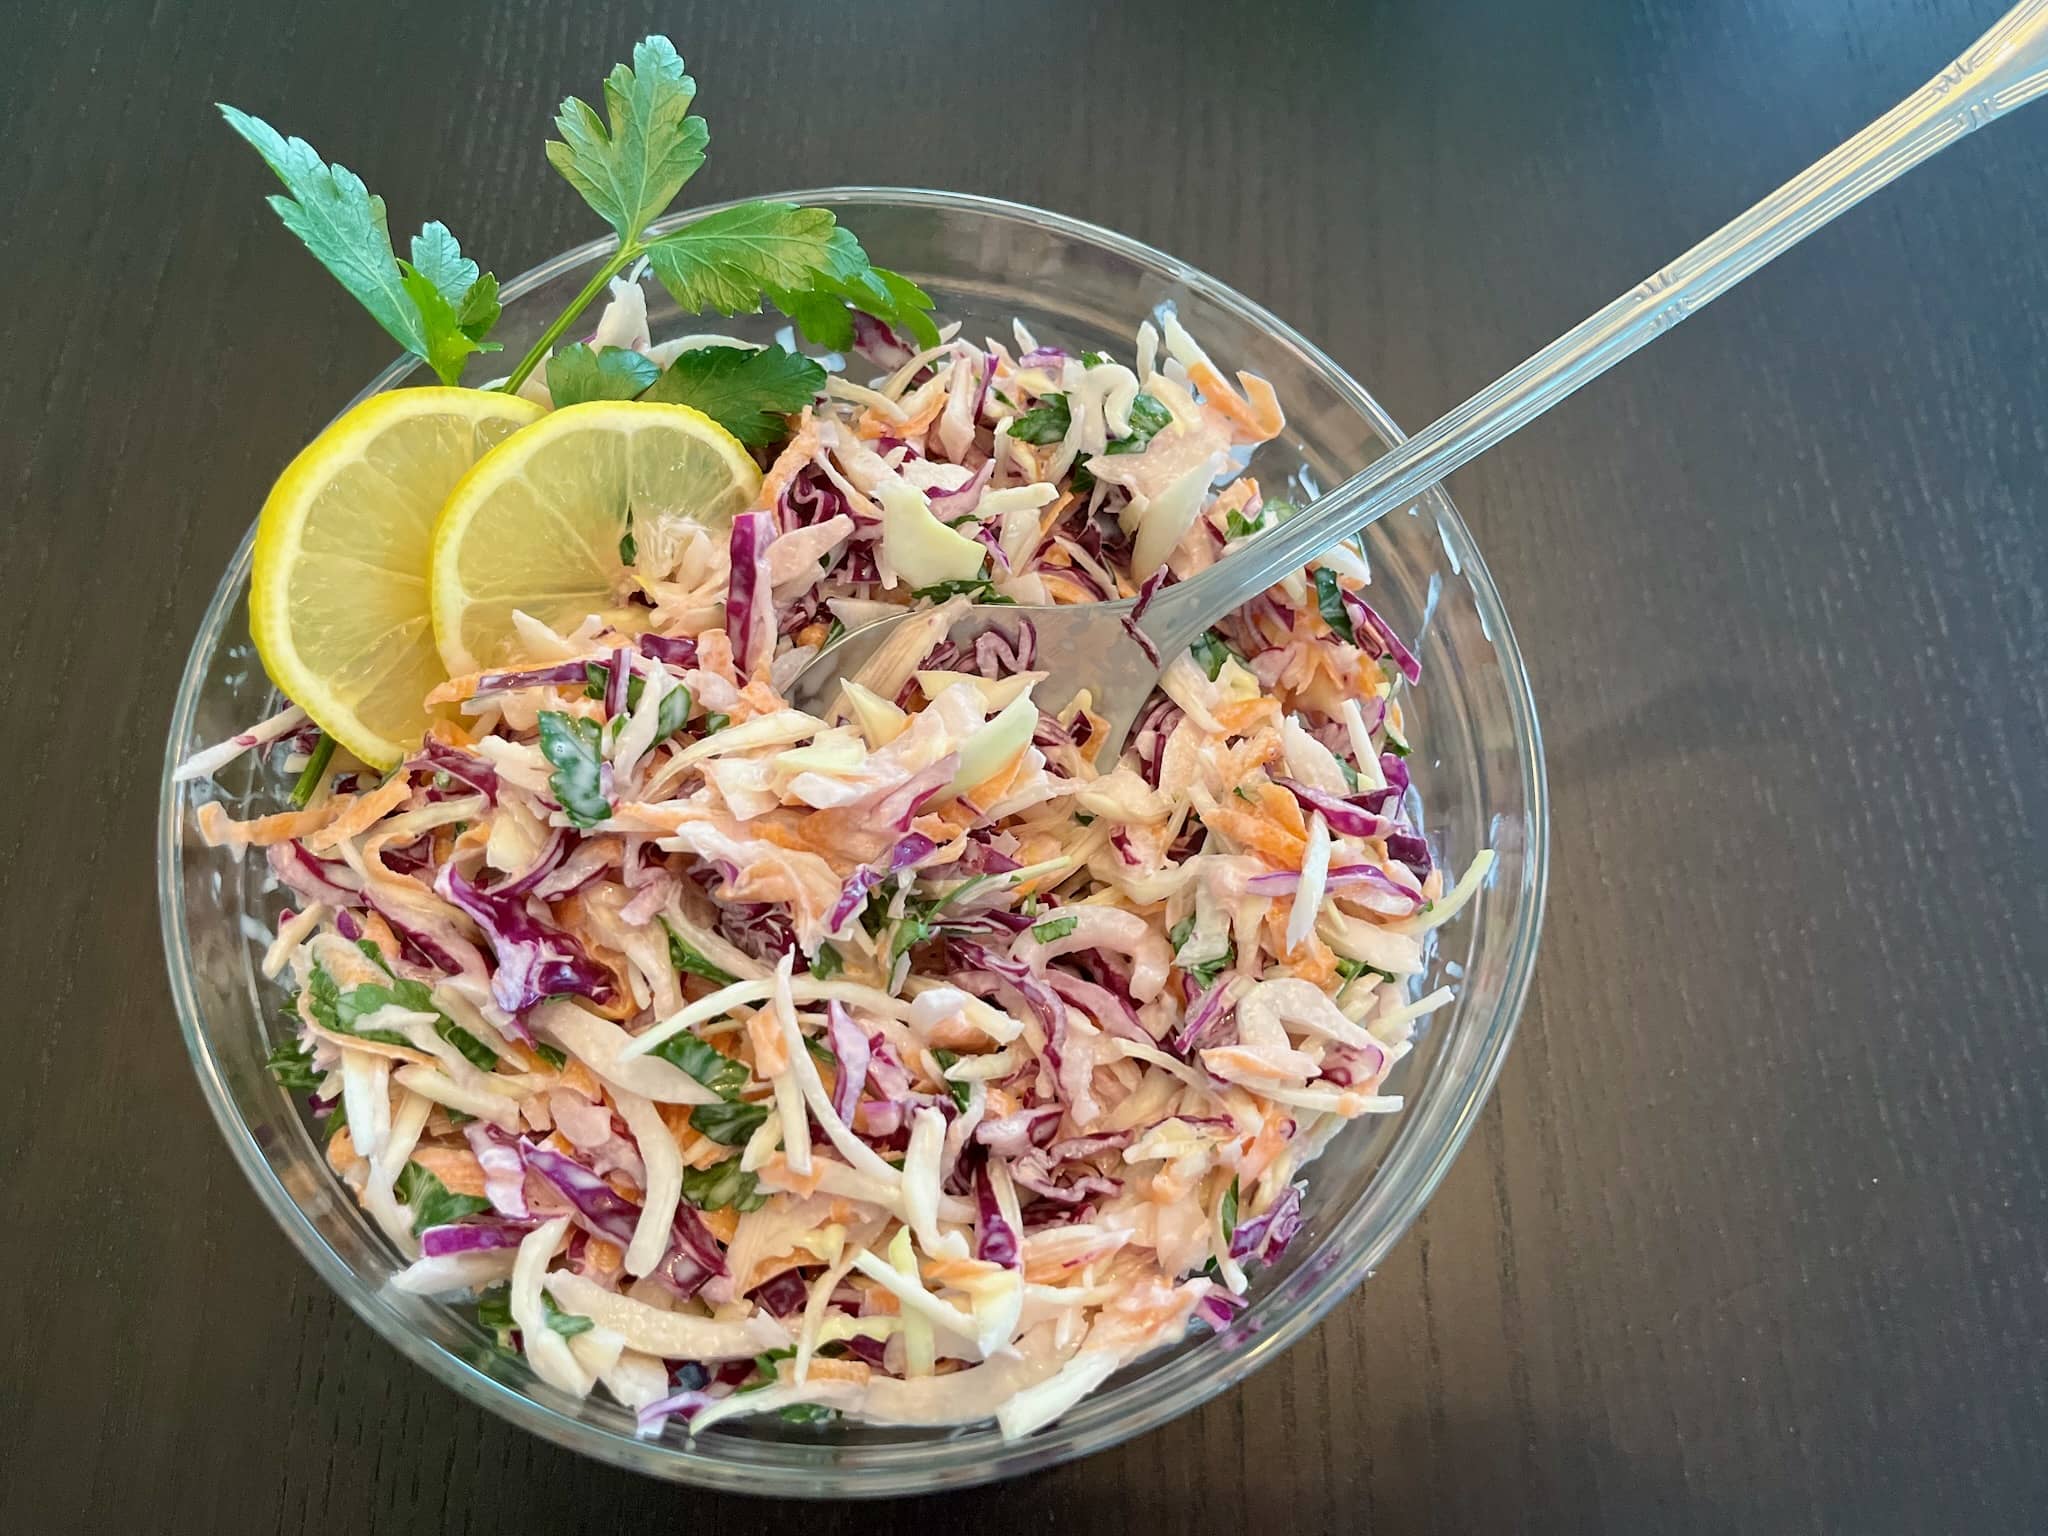 Simple Coleslaw in a bowl, decorated with slices of lemon and fresh parsley